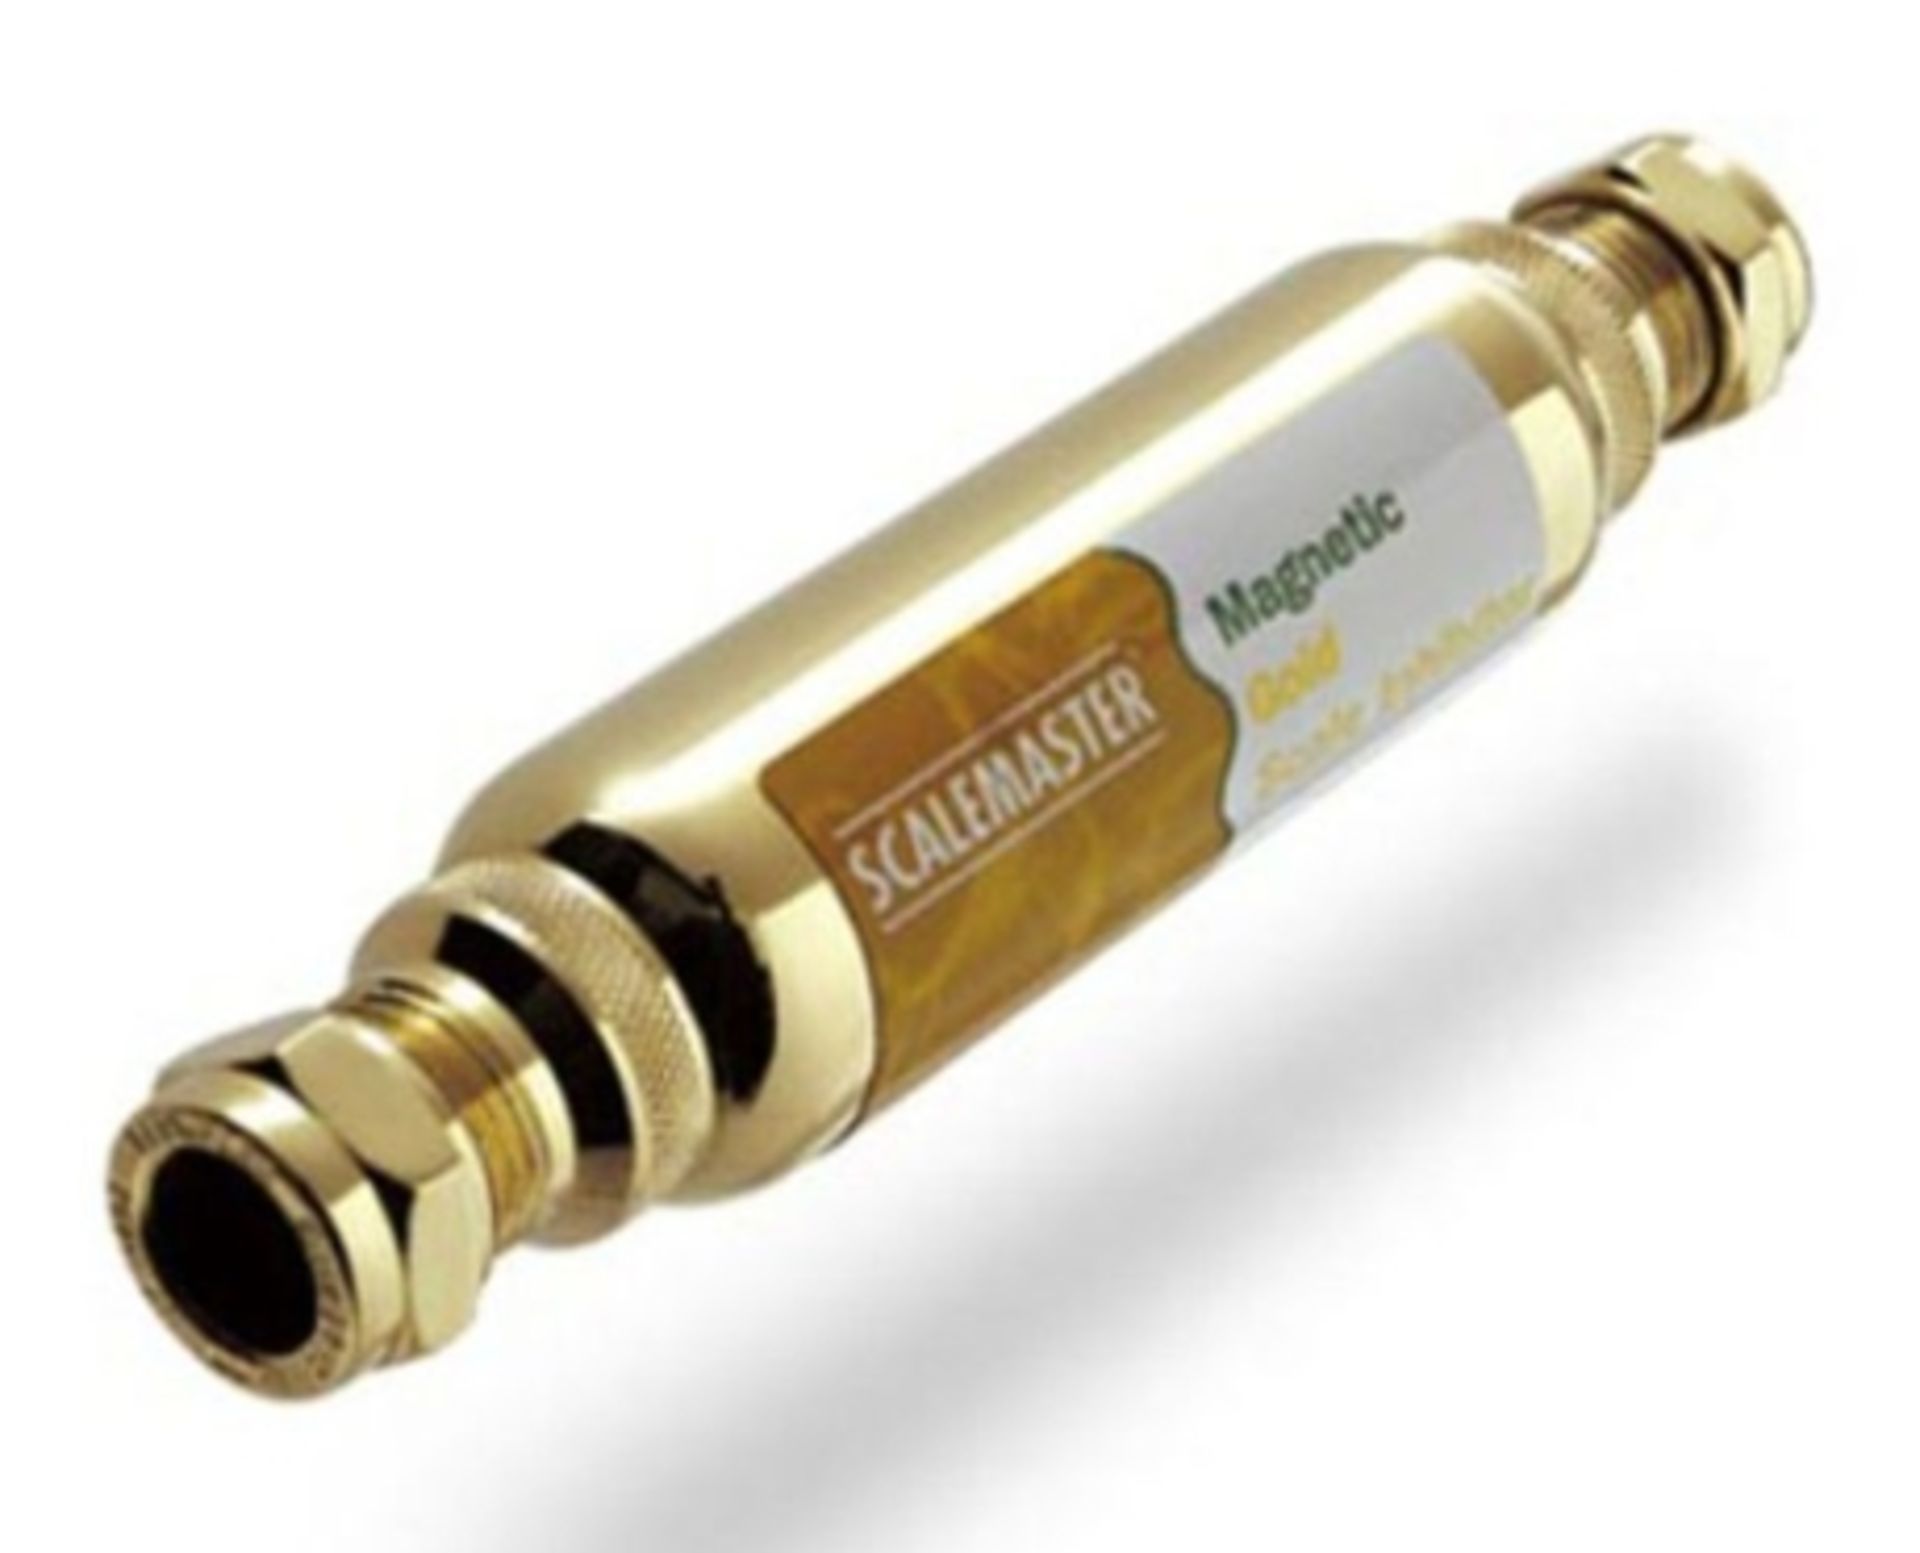 7 x Scalemaster Electrolytic Gold Electrolytic 15mm Limescale Remover - New Boxed Stock - RRP £330